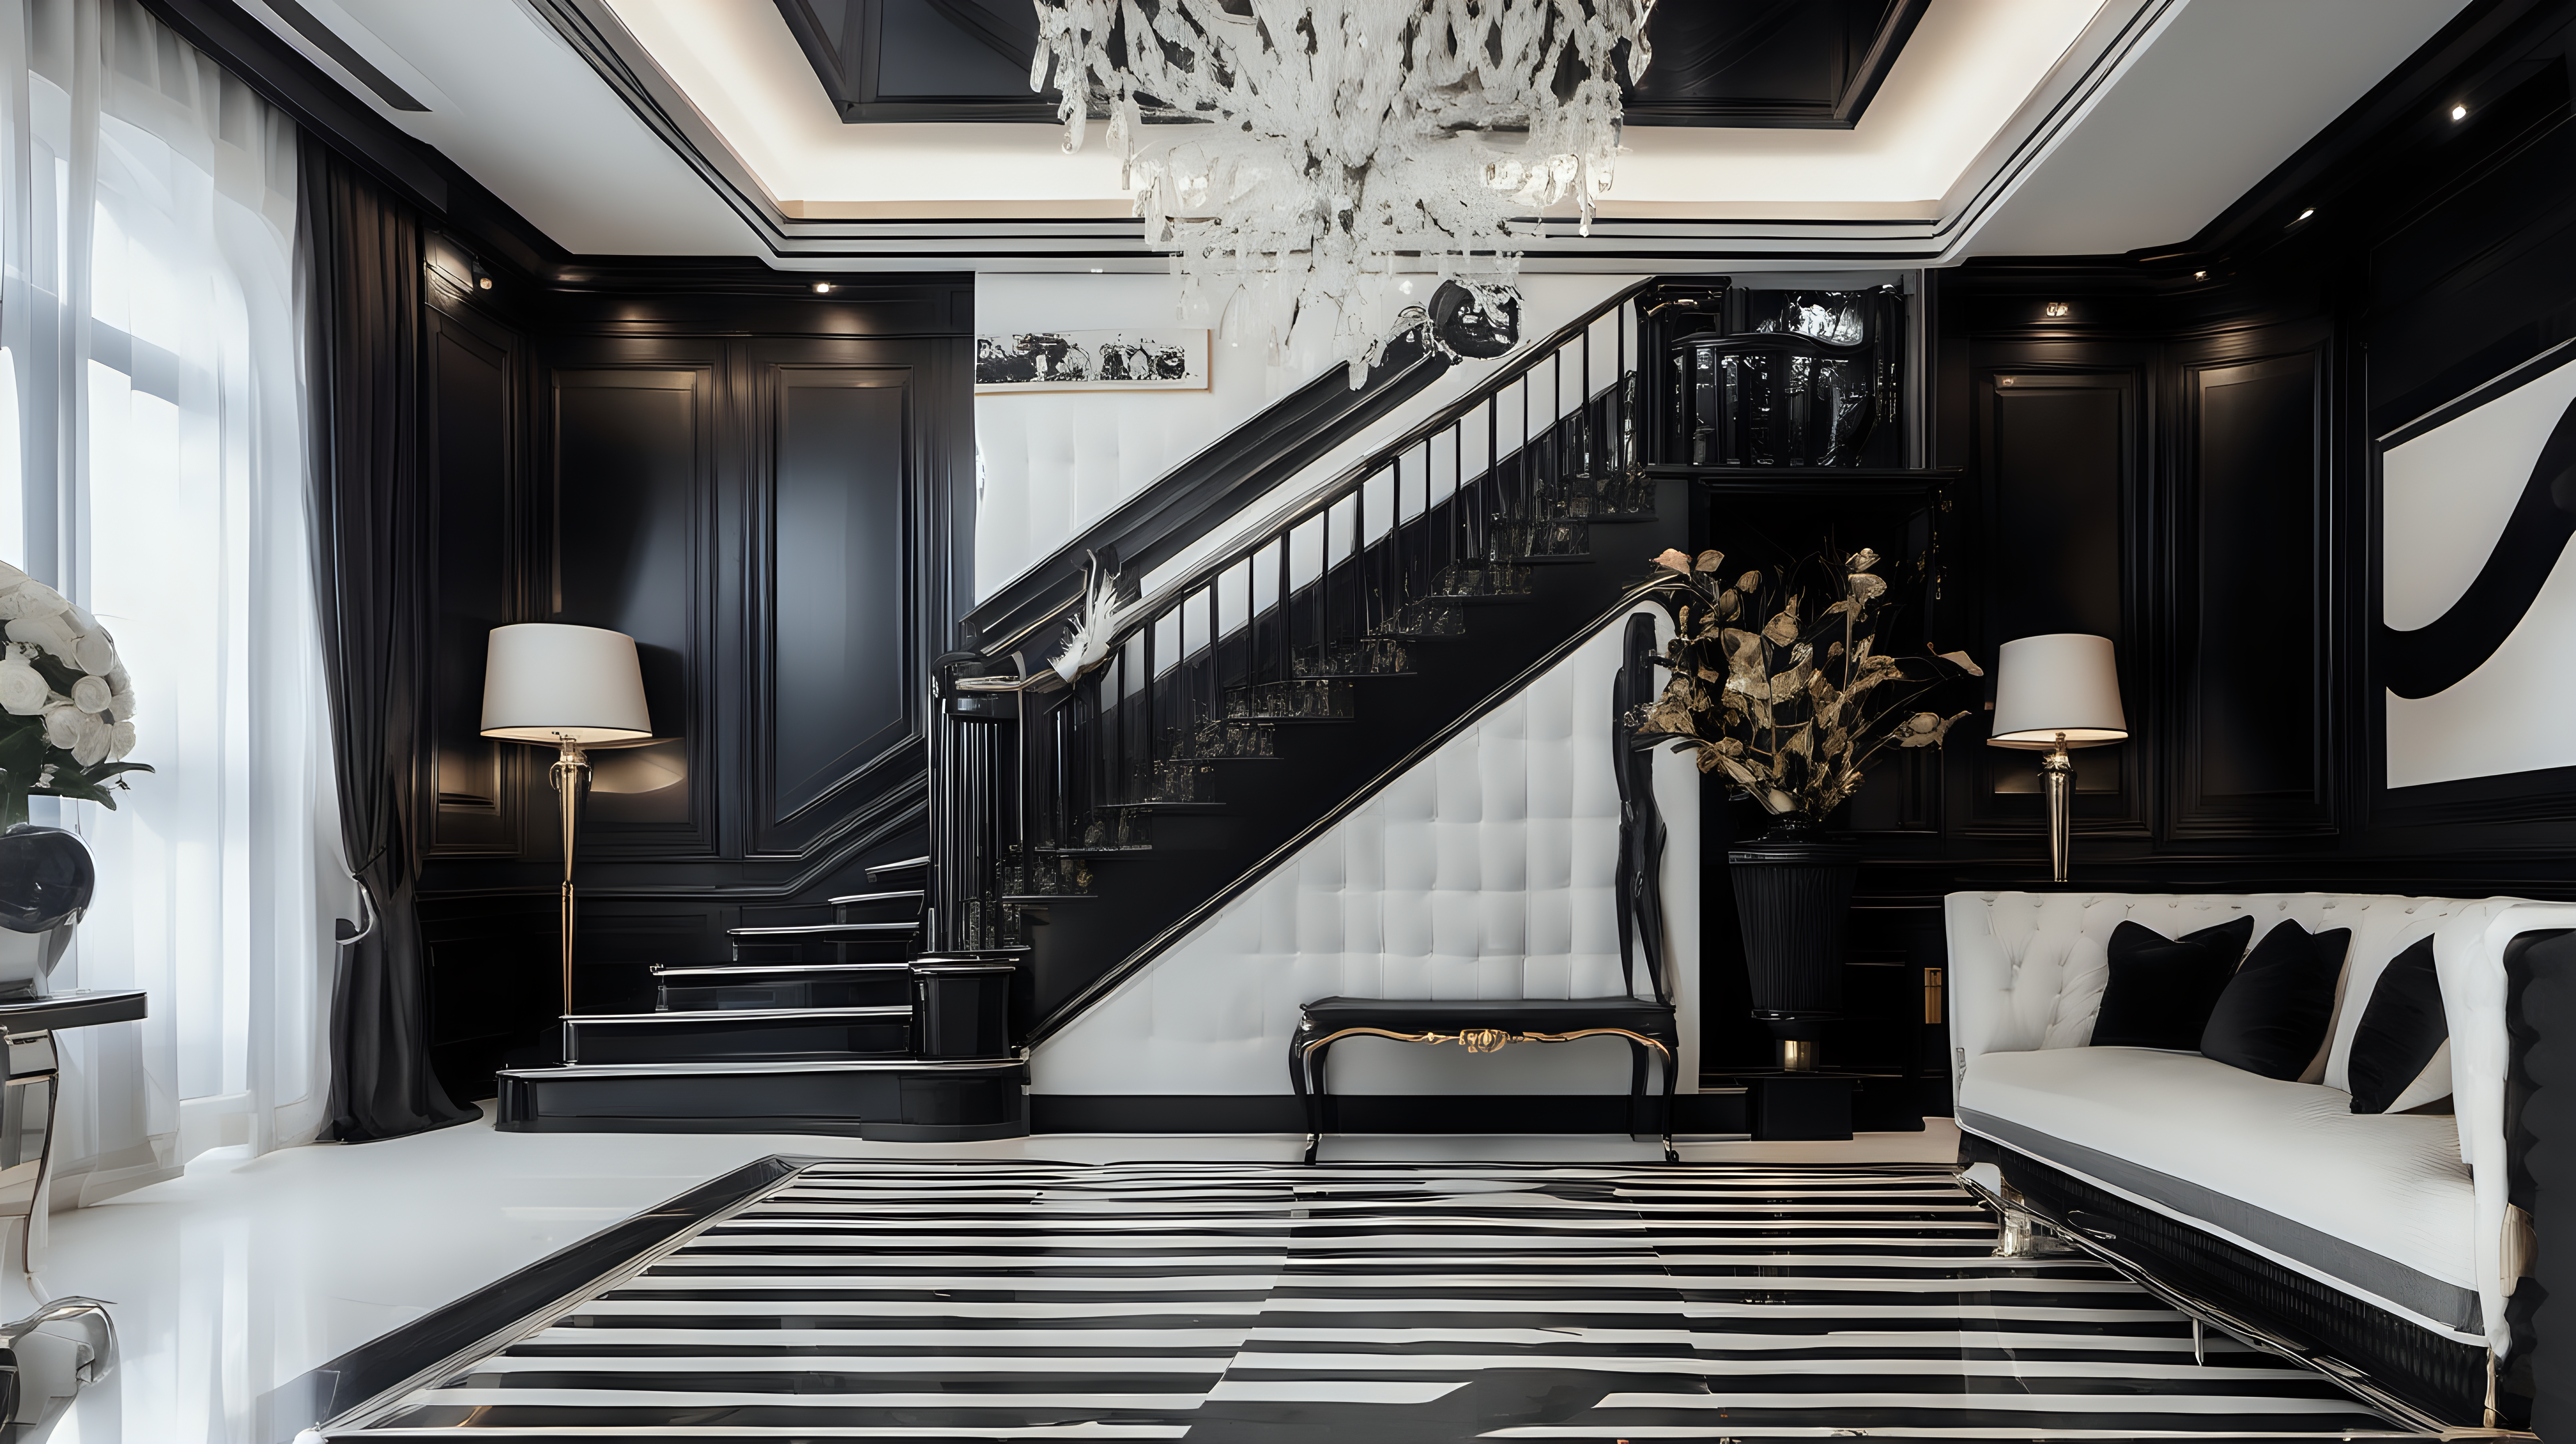 one cozy Interior stairs with black and white luxury details